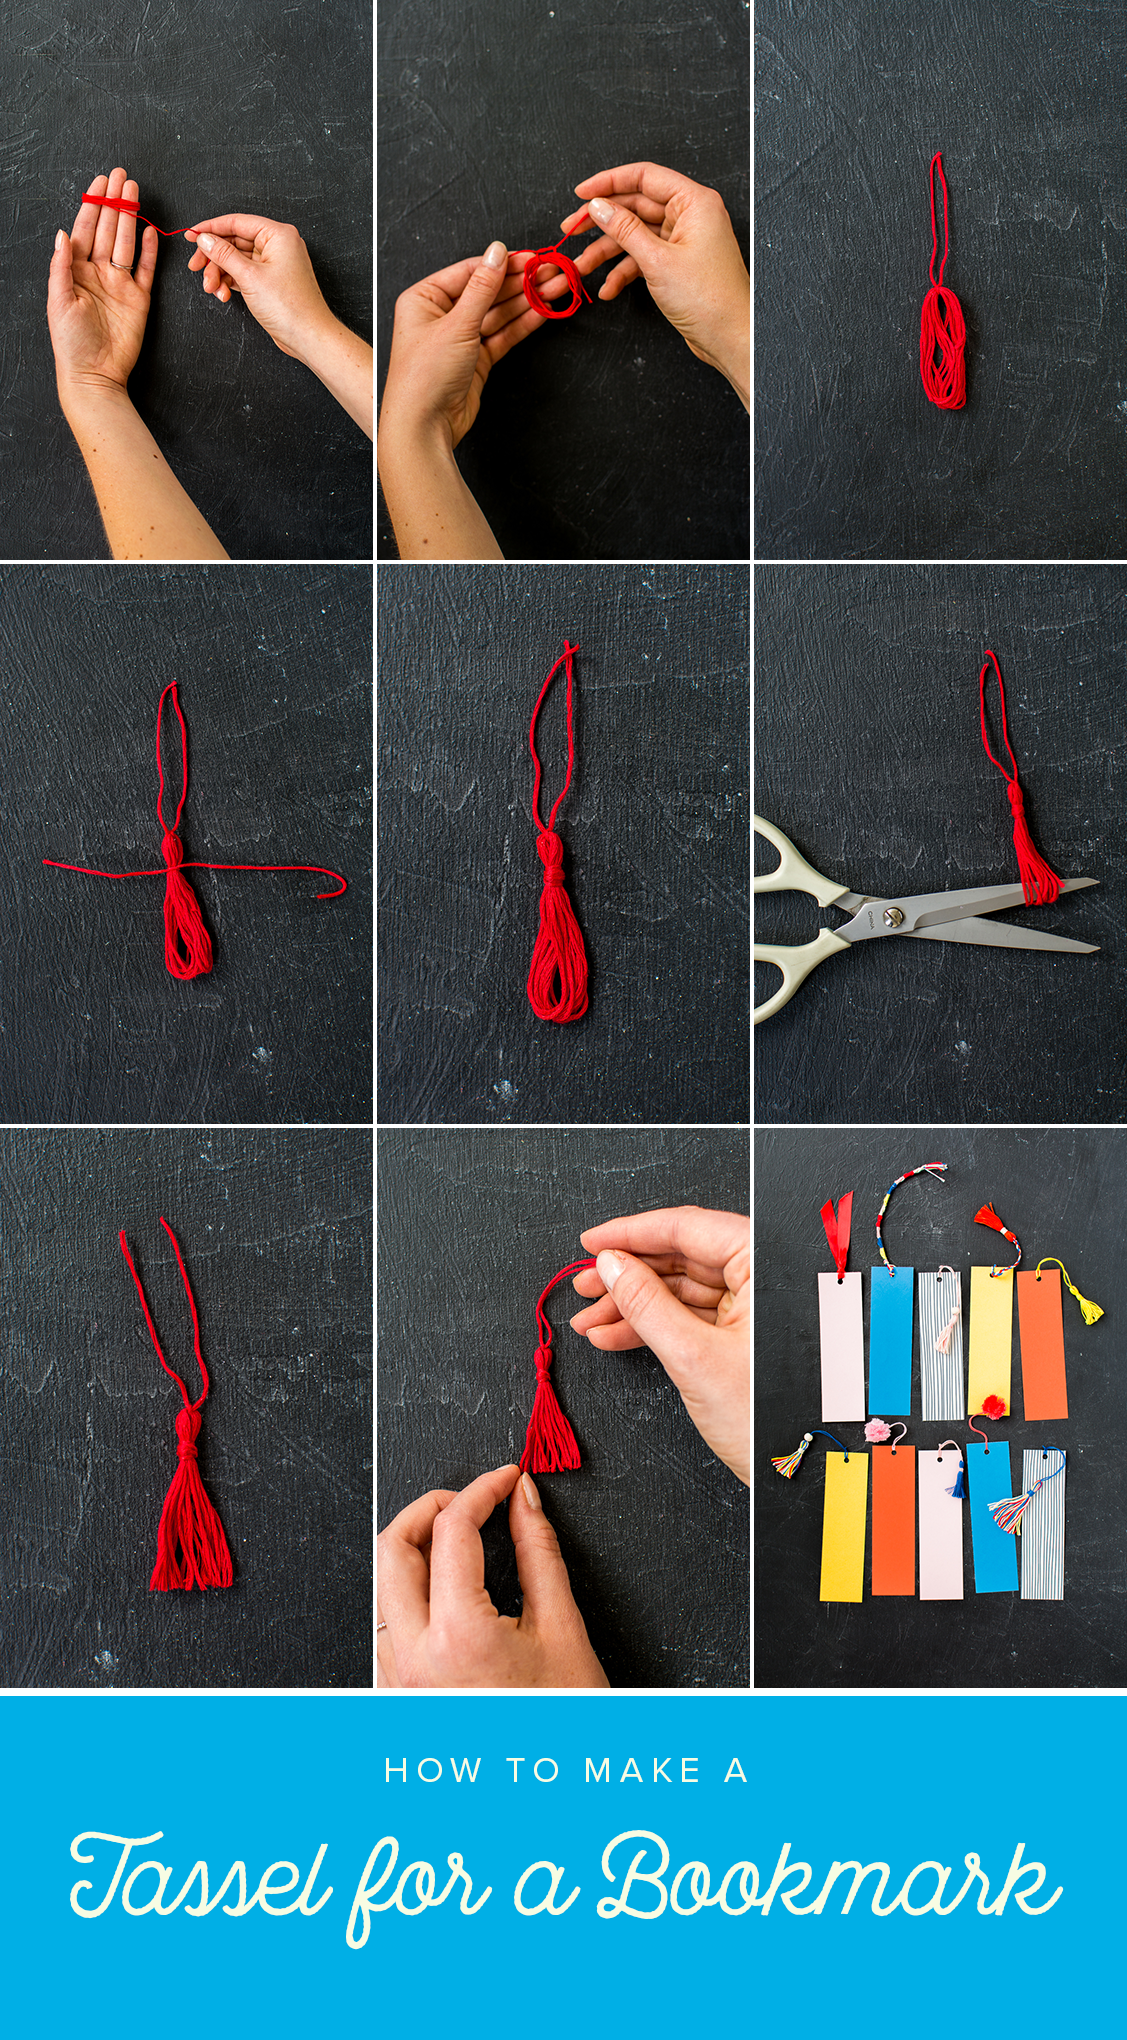 4 techniques for making tassels and poms for bookmarks